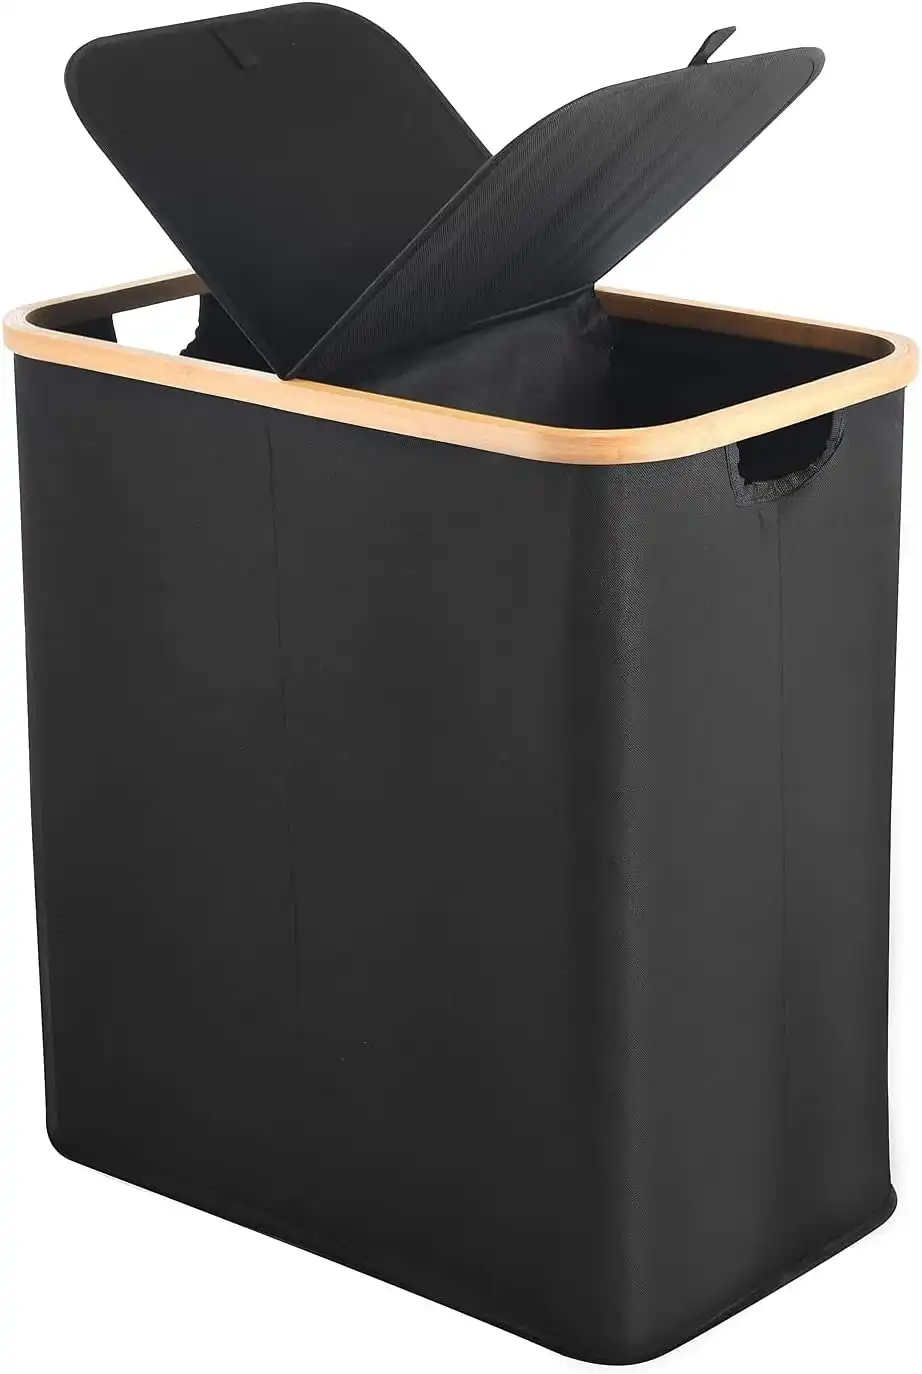 Double Large Laundry Basket with Lid (Black)